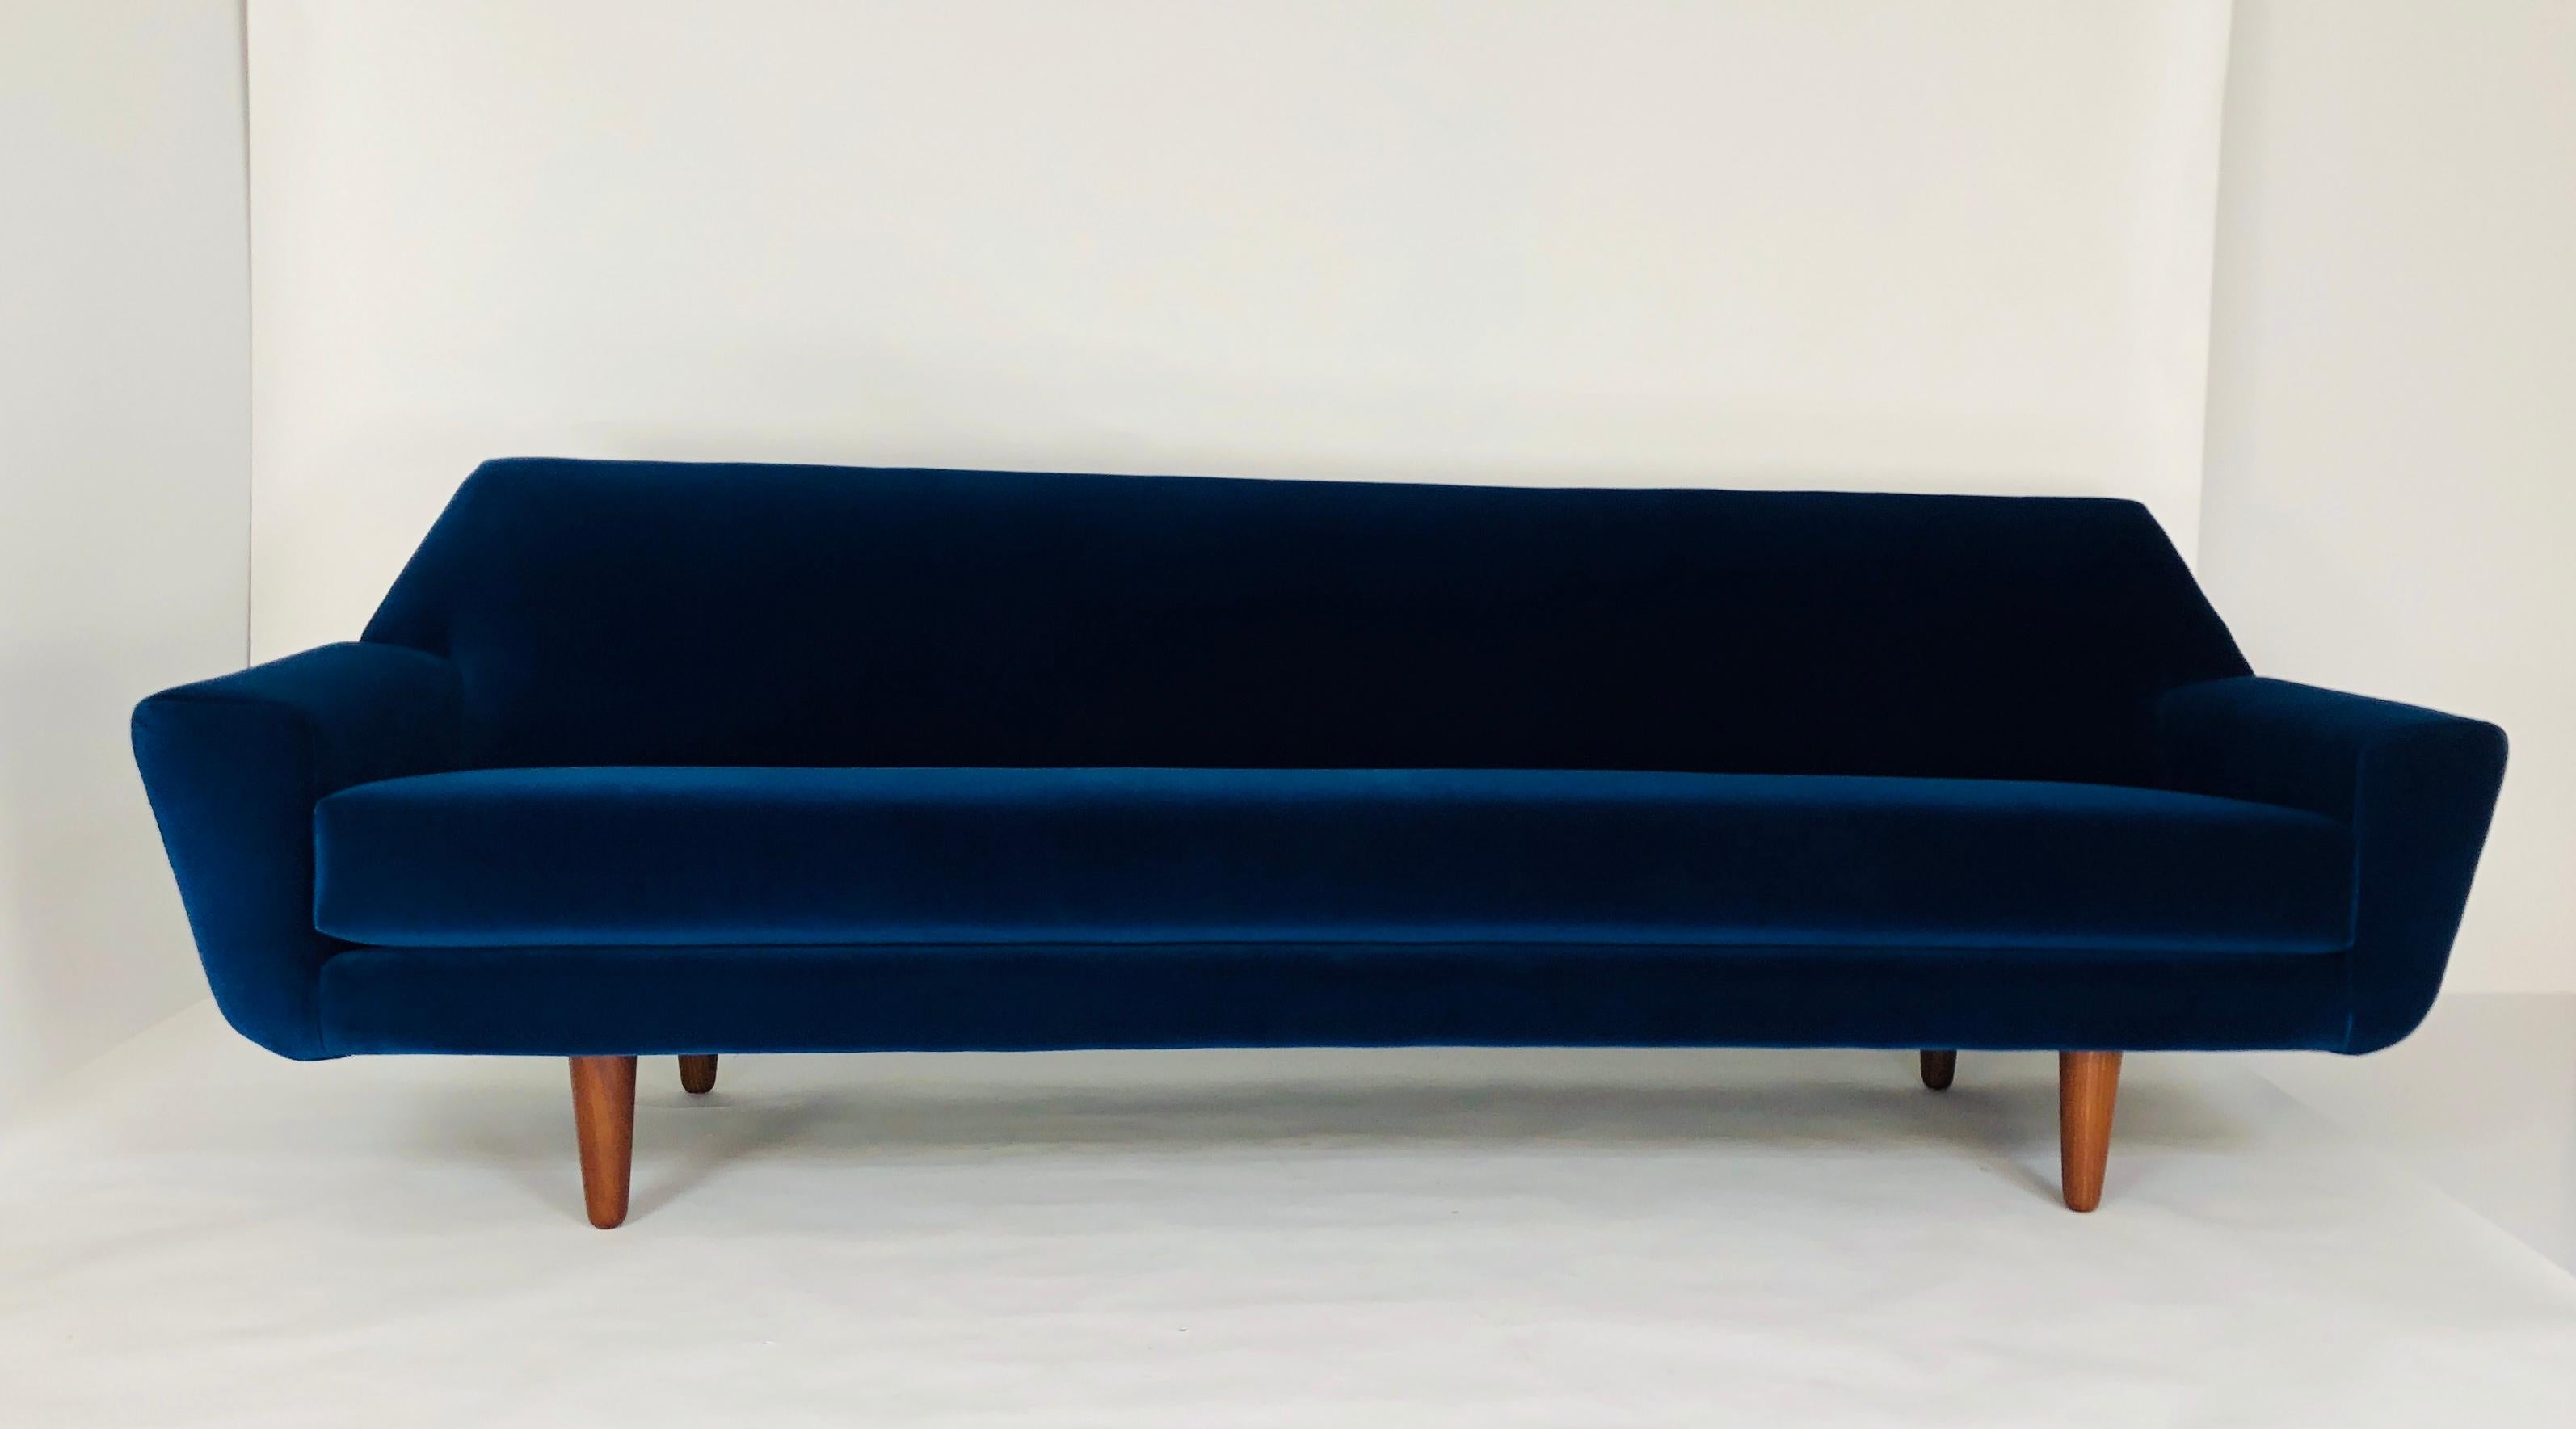 Very sleek Danish midcentury sofa. Refurbished and covered with navy blue cotton velvet upholstery. Four rosewood conic legs.